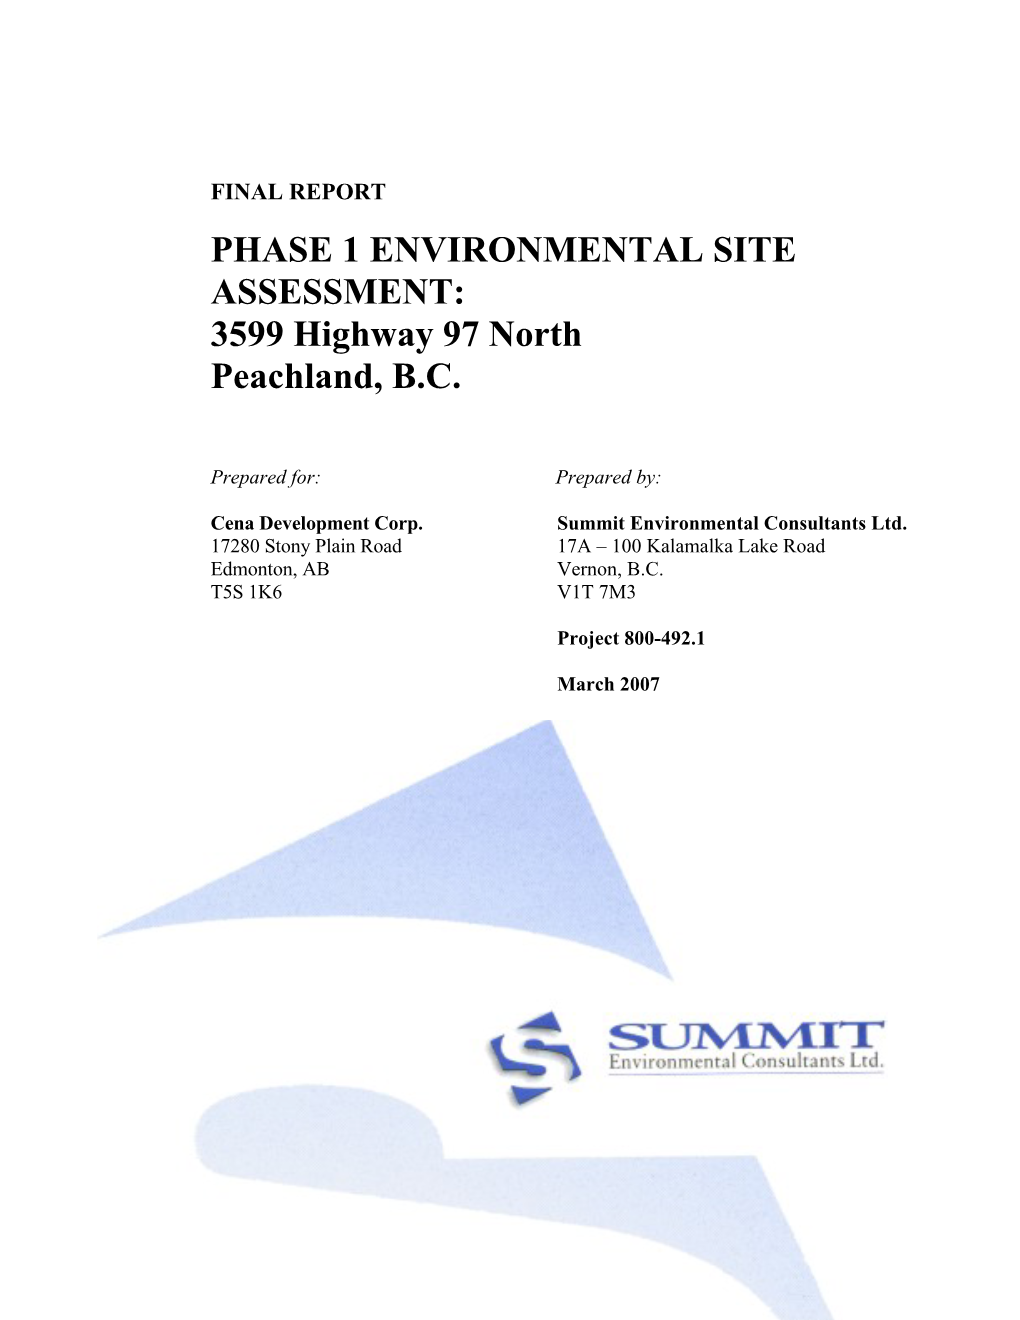 PHASE 1 ENVIRONMENTAL SITE ASSESSMENT: 3599 Highway 97 North Peachland, B.C